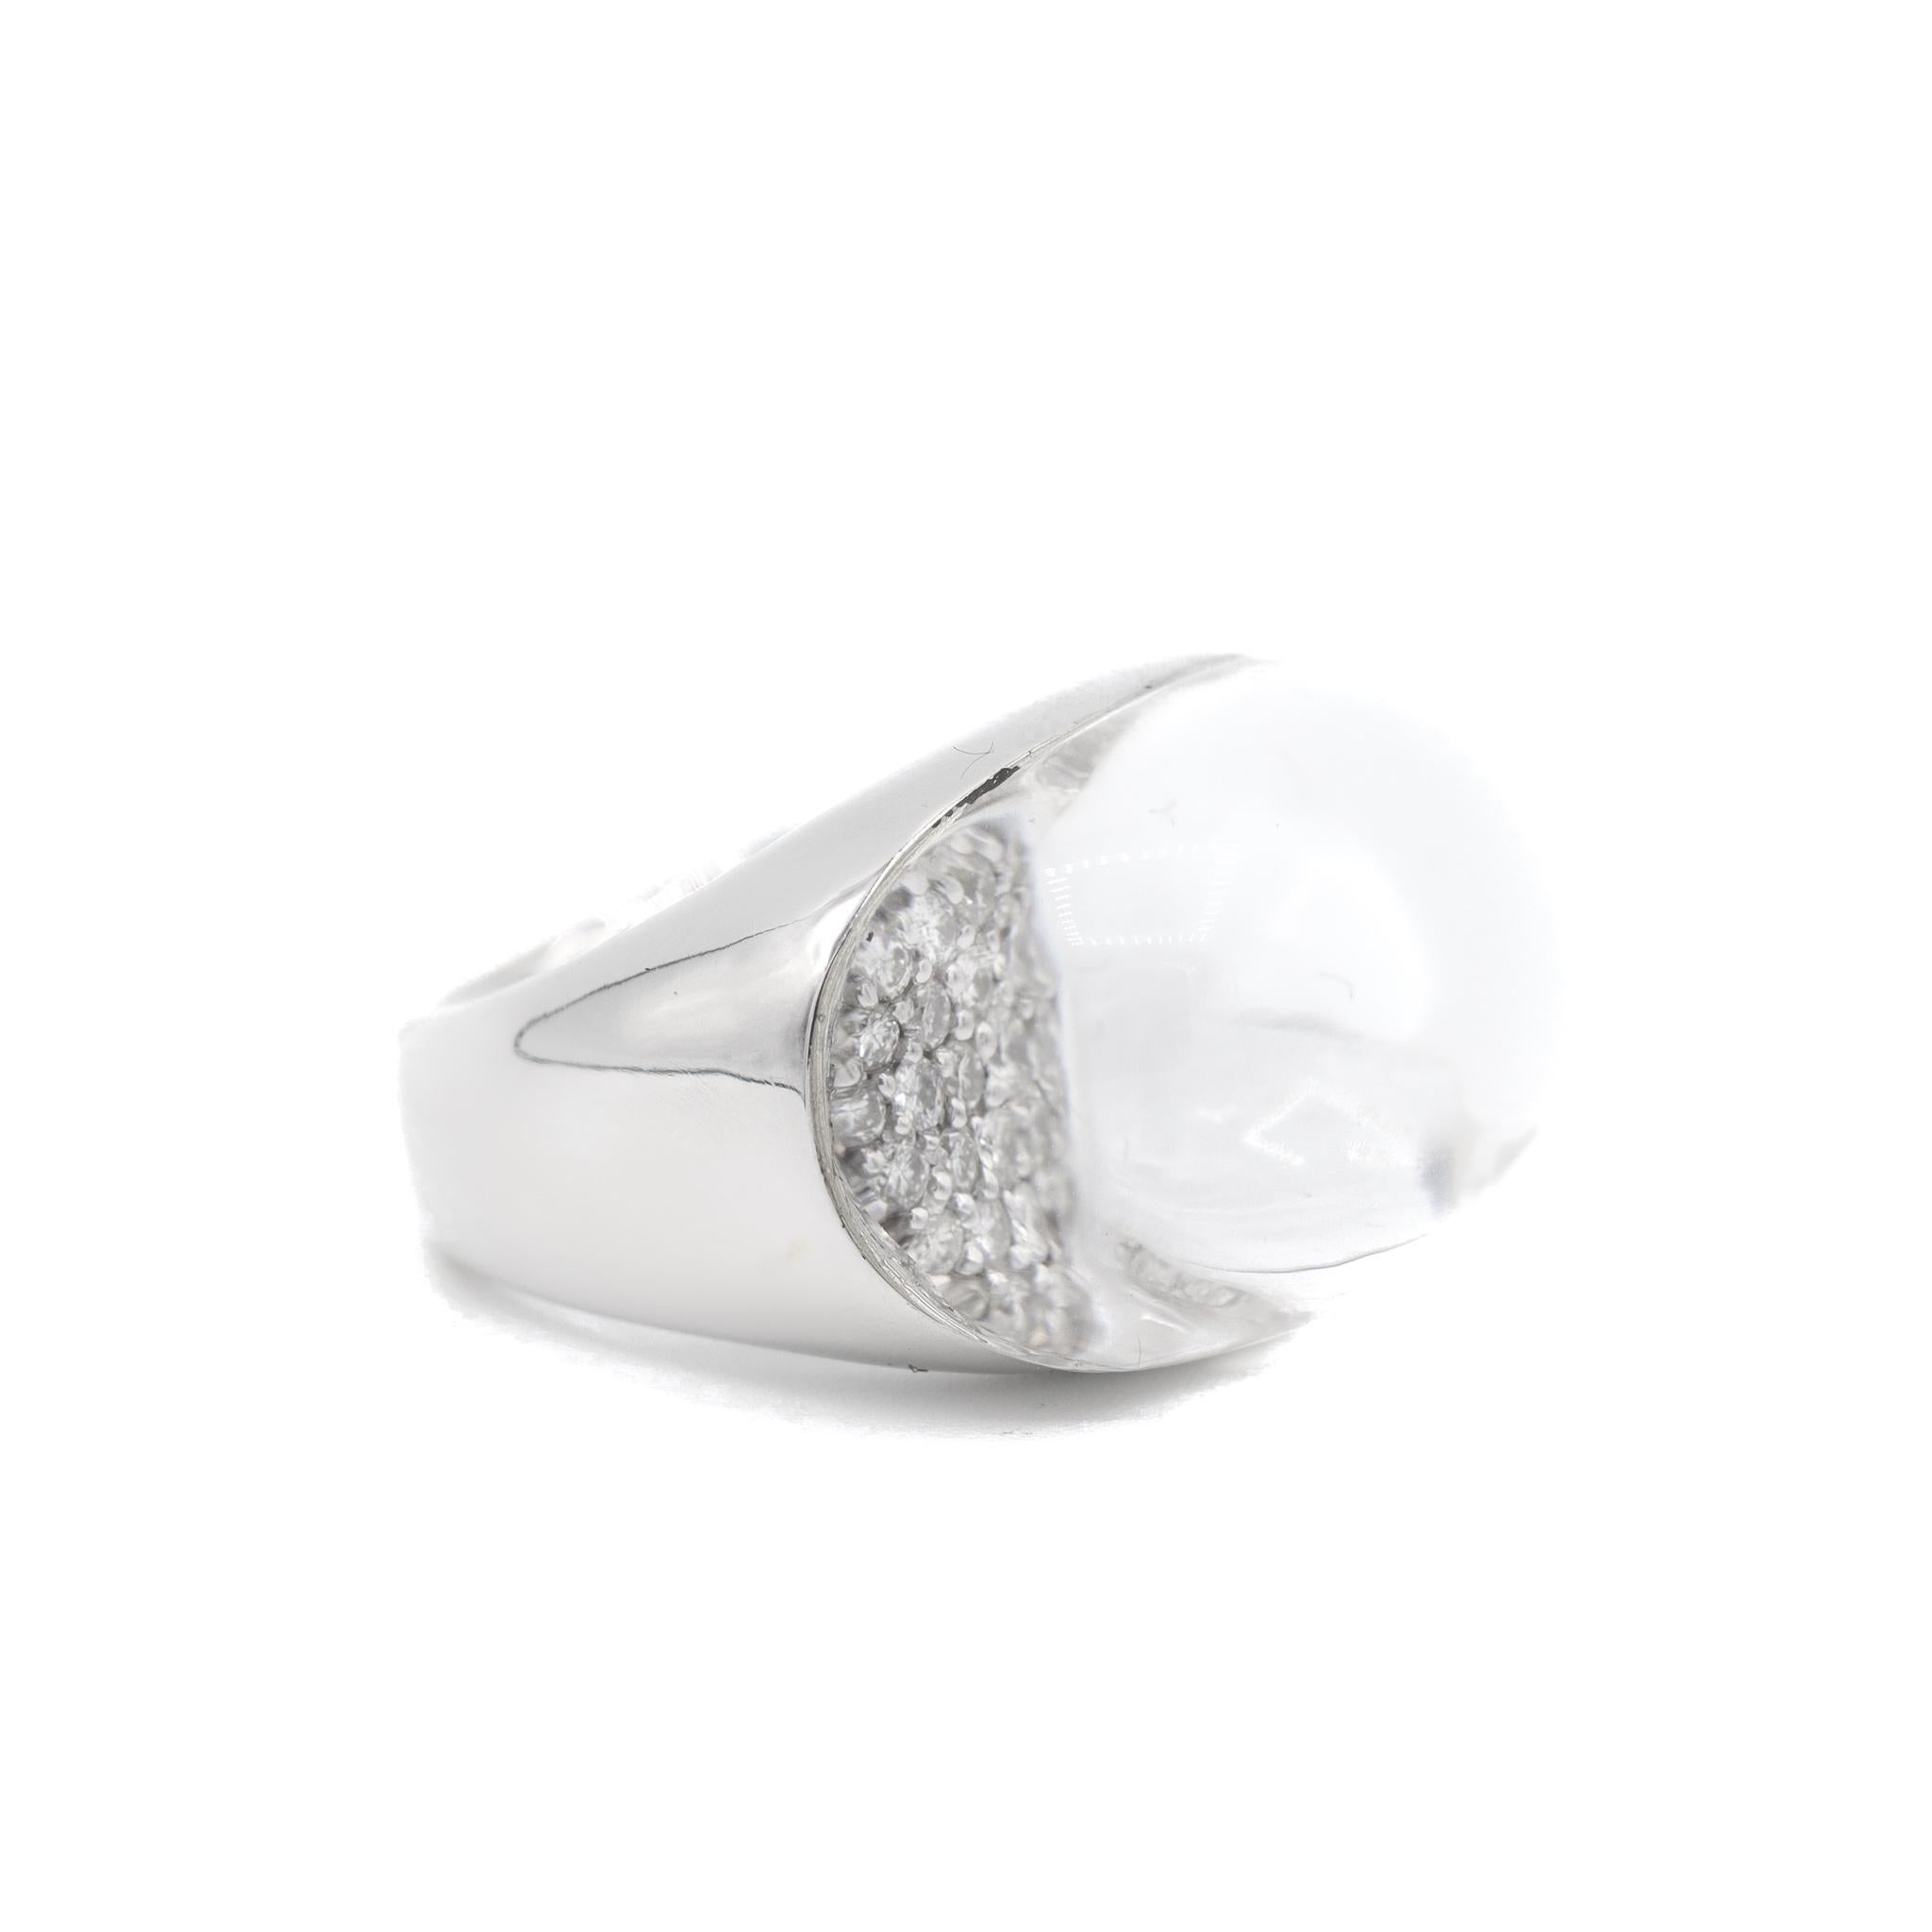 Gender: Ladies

Metal Type: 18K White Gold

Size (US): 6.25

Weight: 20.90 grams

18K white gold diamond cocktail birthstone ring with a comfort-fit shank.

Engraved with 